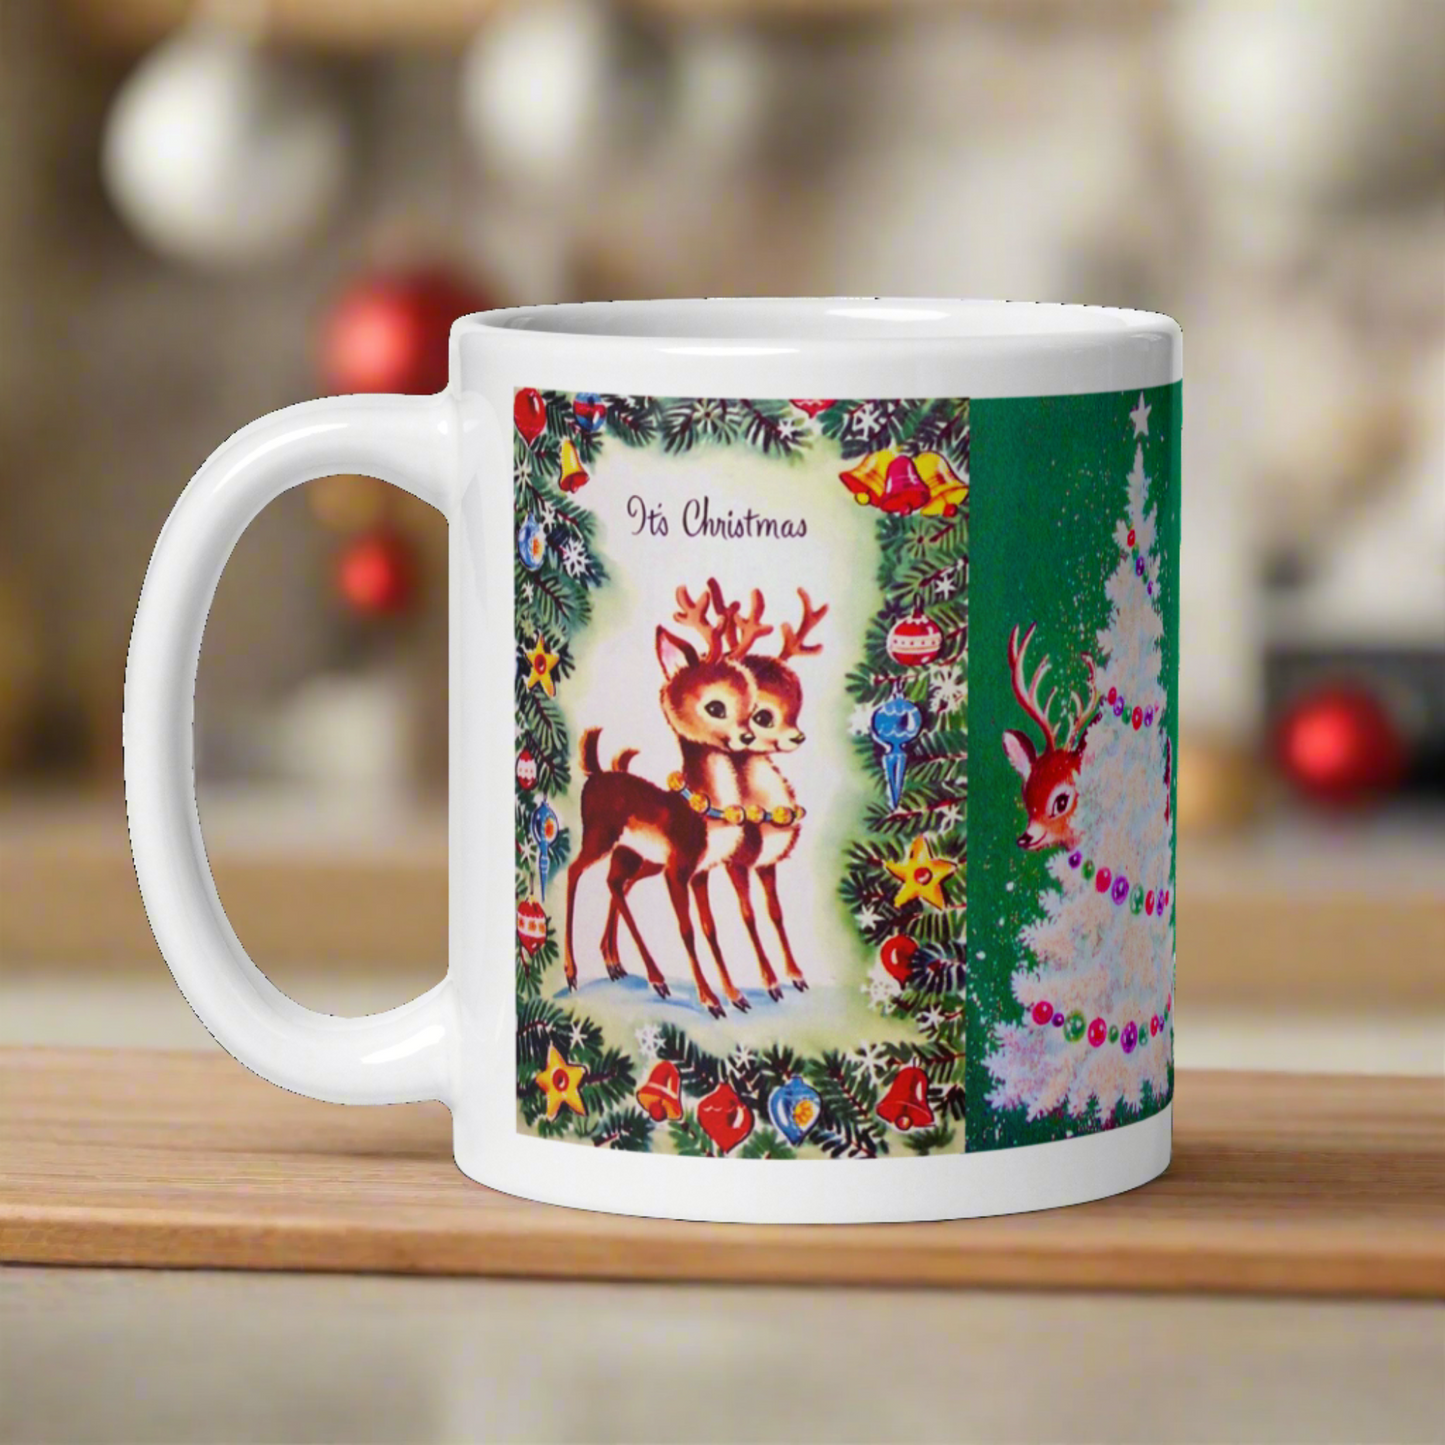 This ceramic coffee mug features four different vintage Christmas prints featuring different scenes with reindeer.